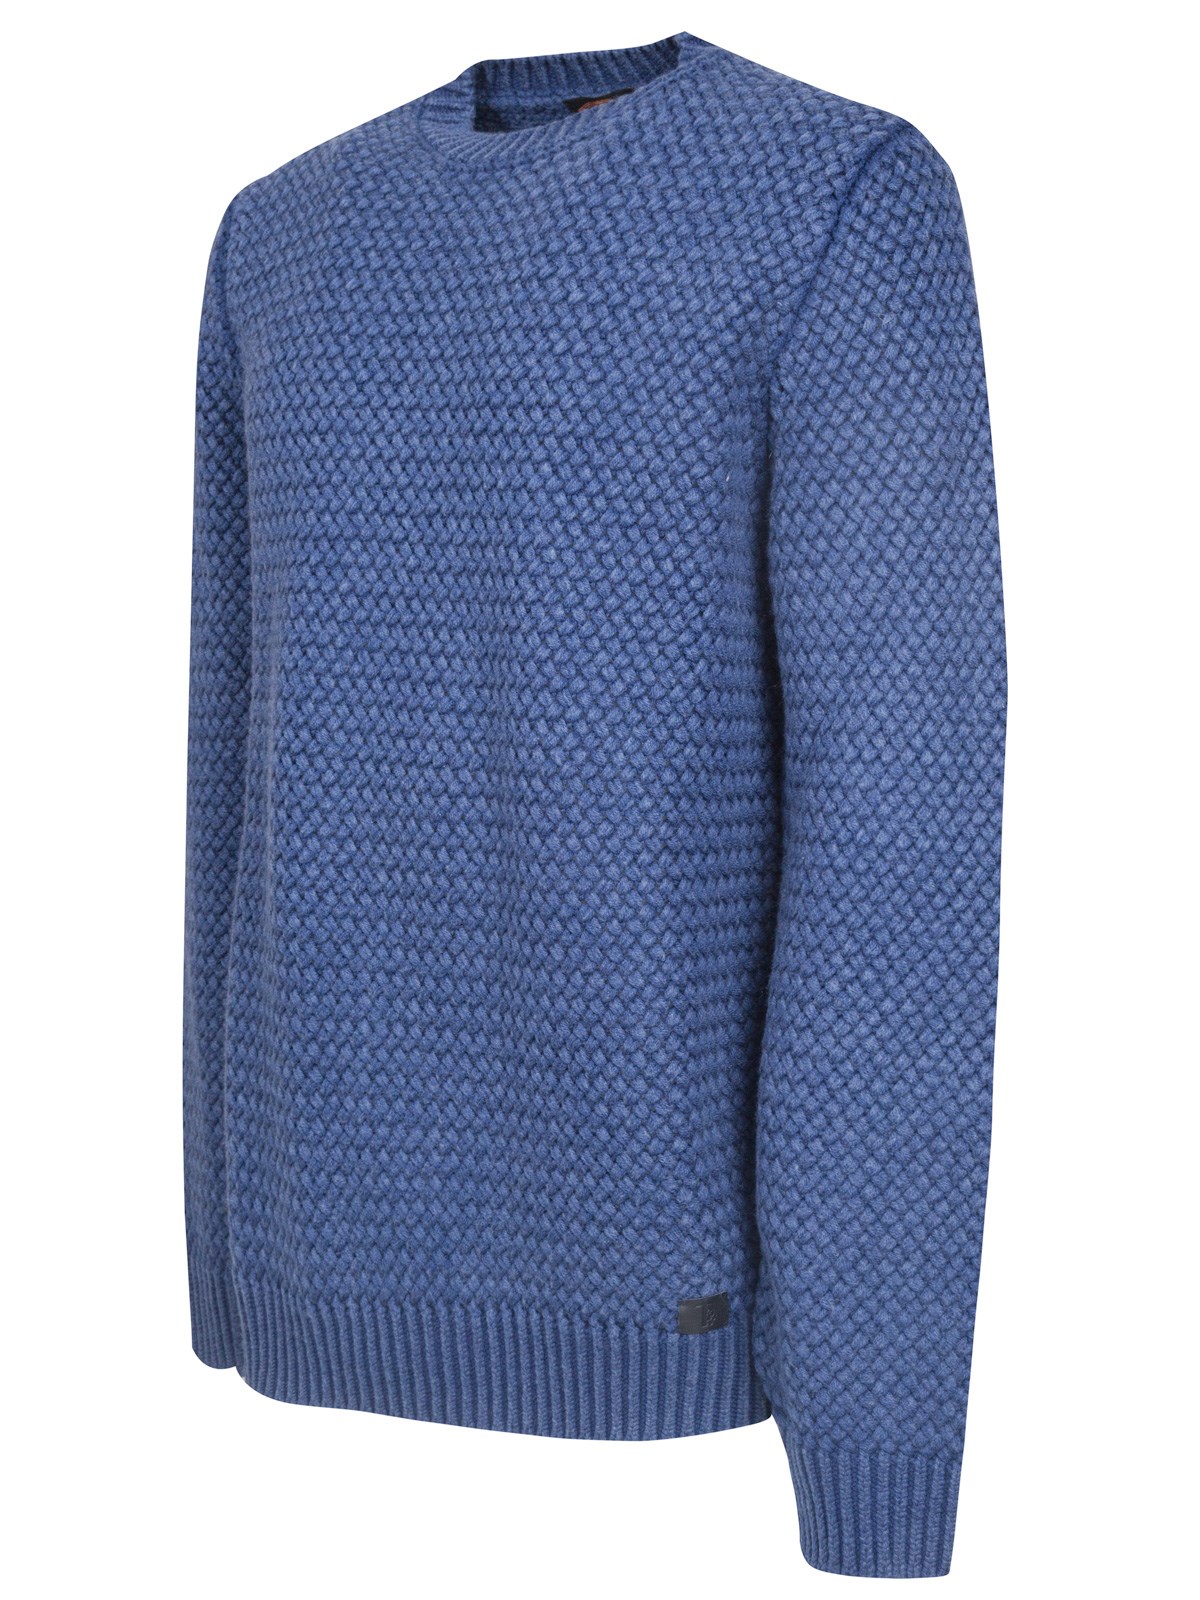 tod`s WOOL SWEATER available on montiboutique.com - 21141